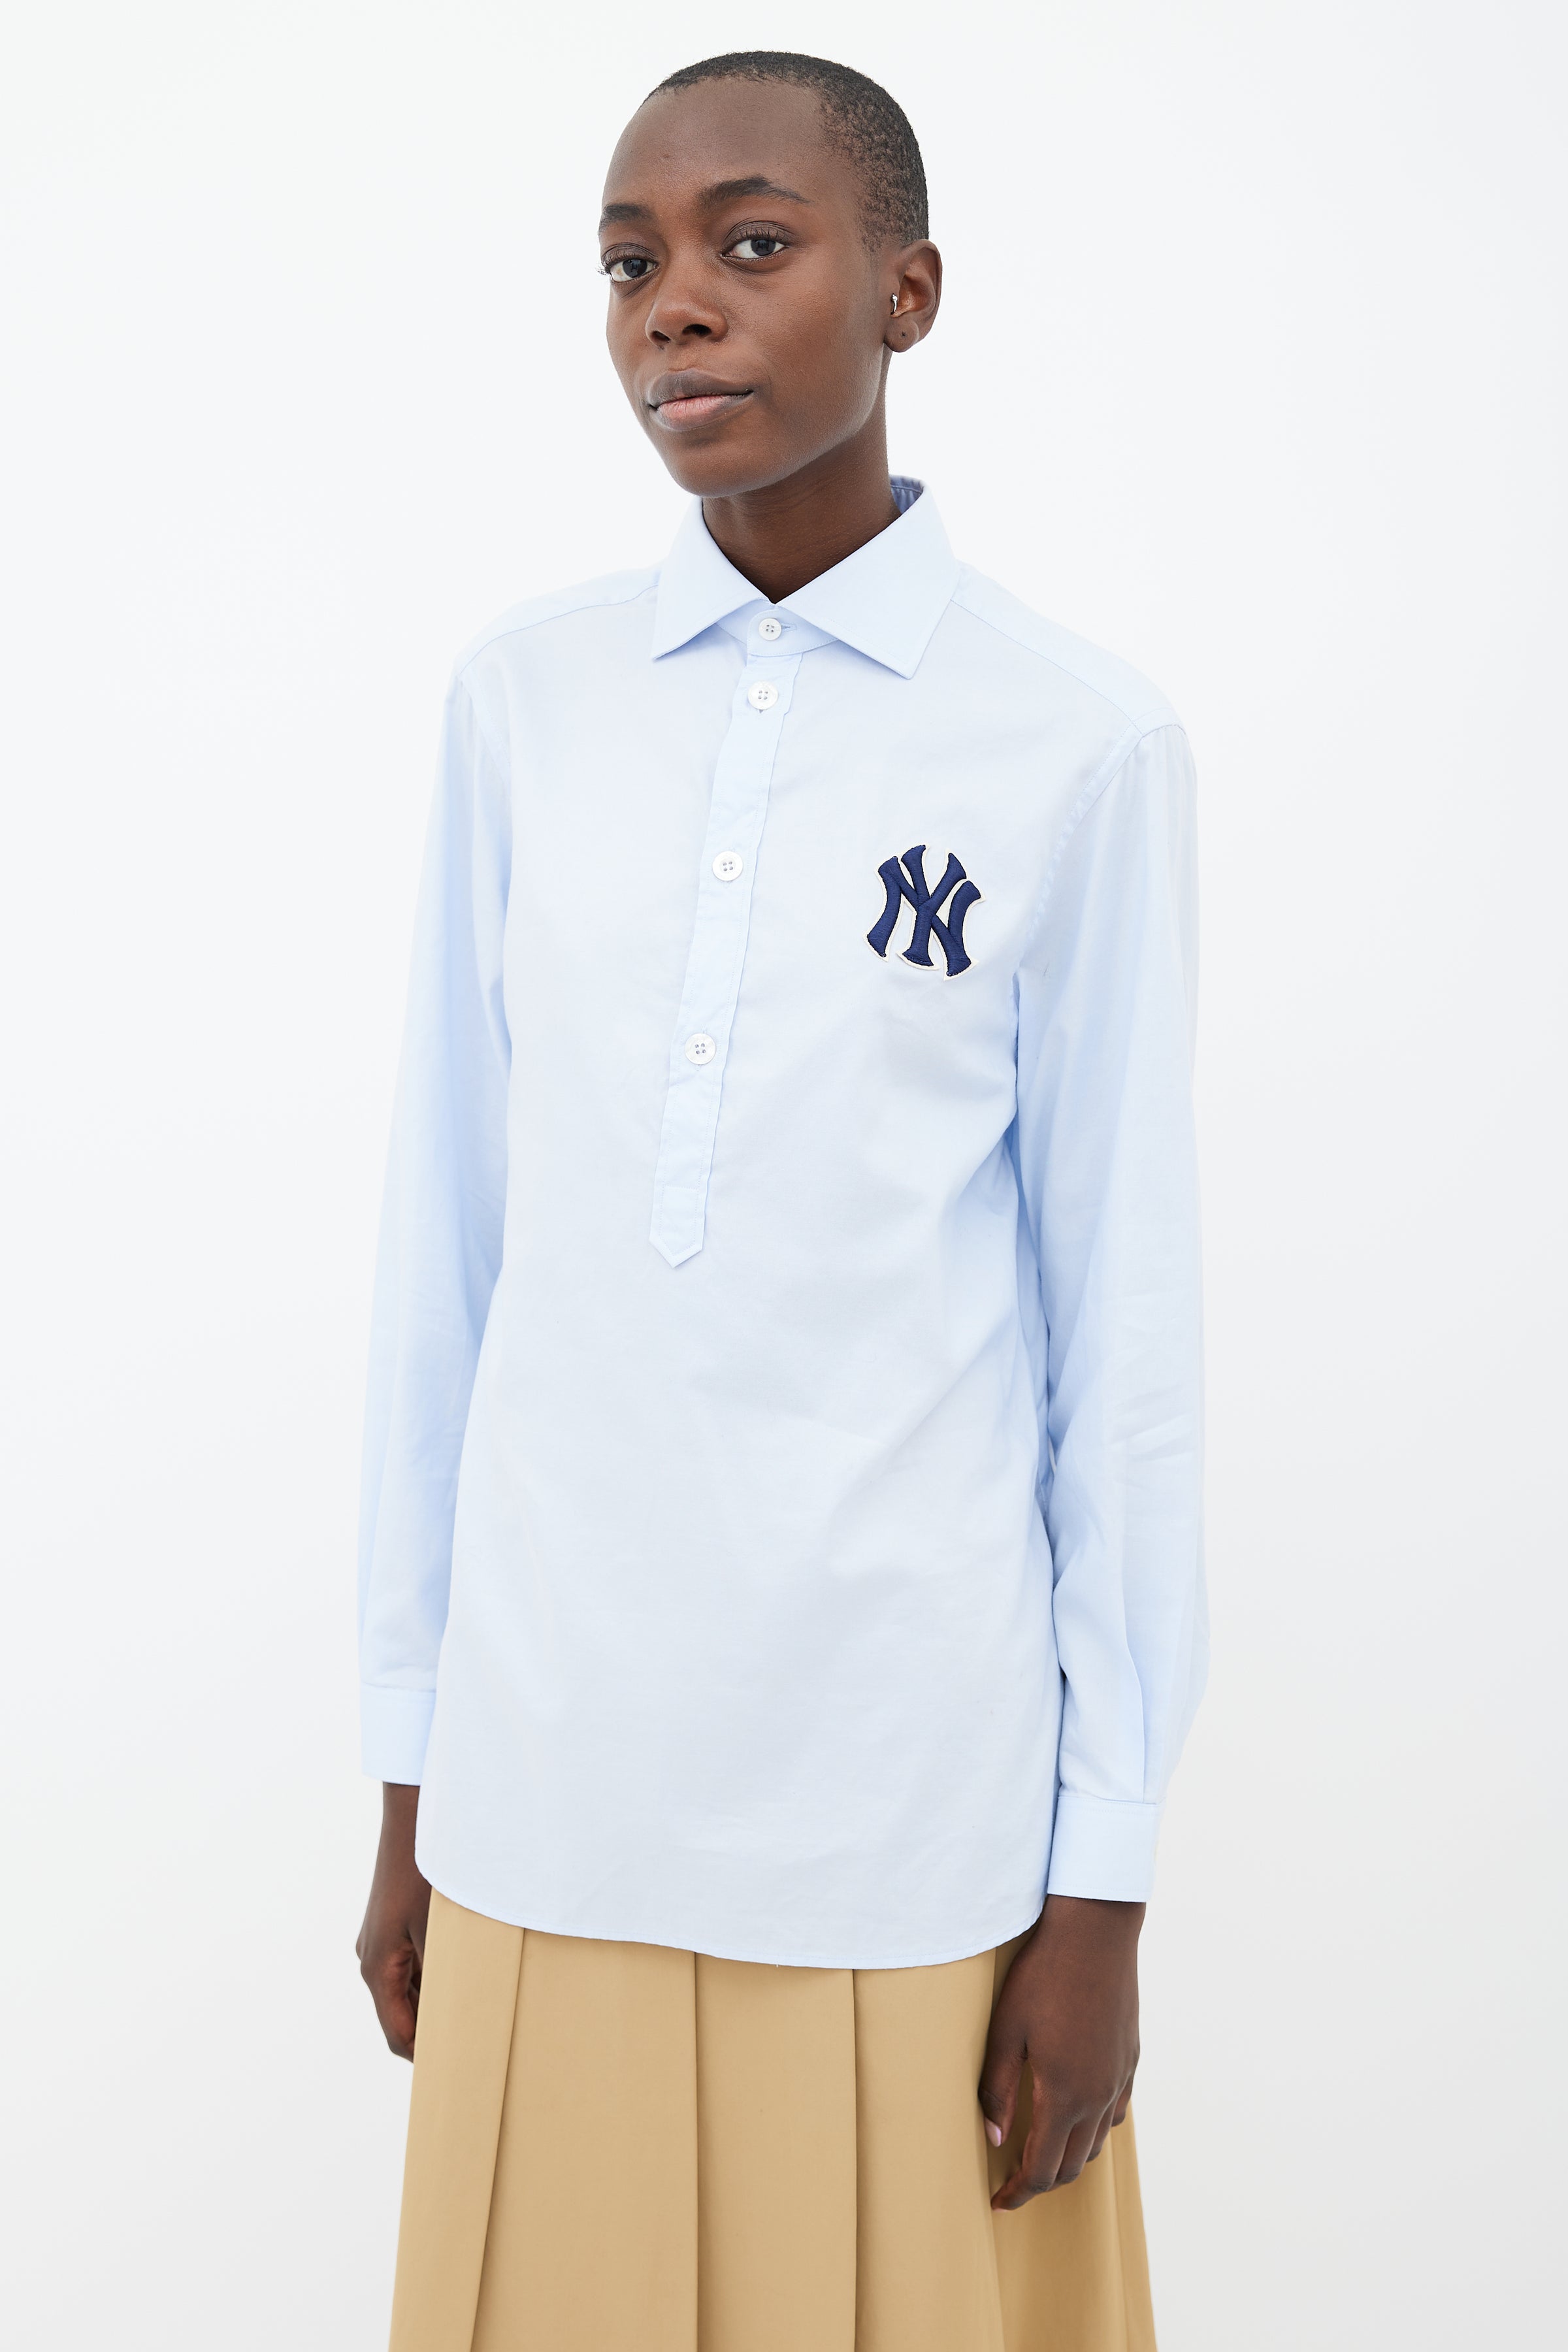 Gucci Ny Yankees Patch Polo Shirt in White for Men